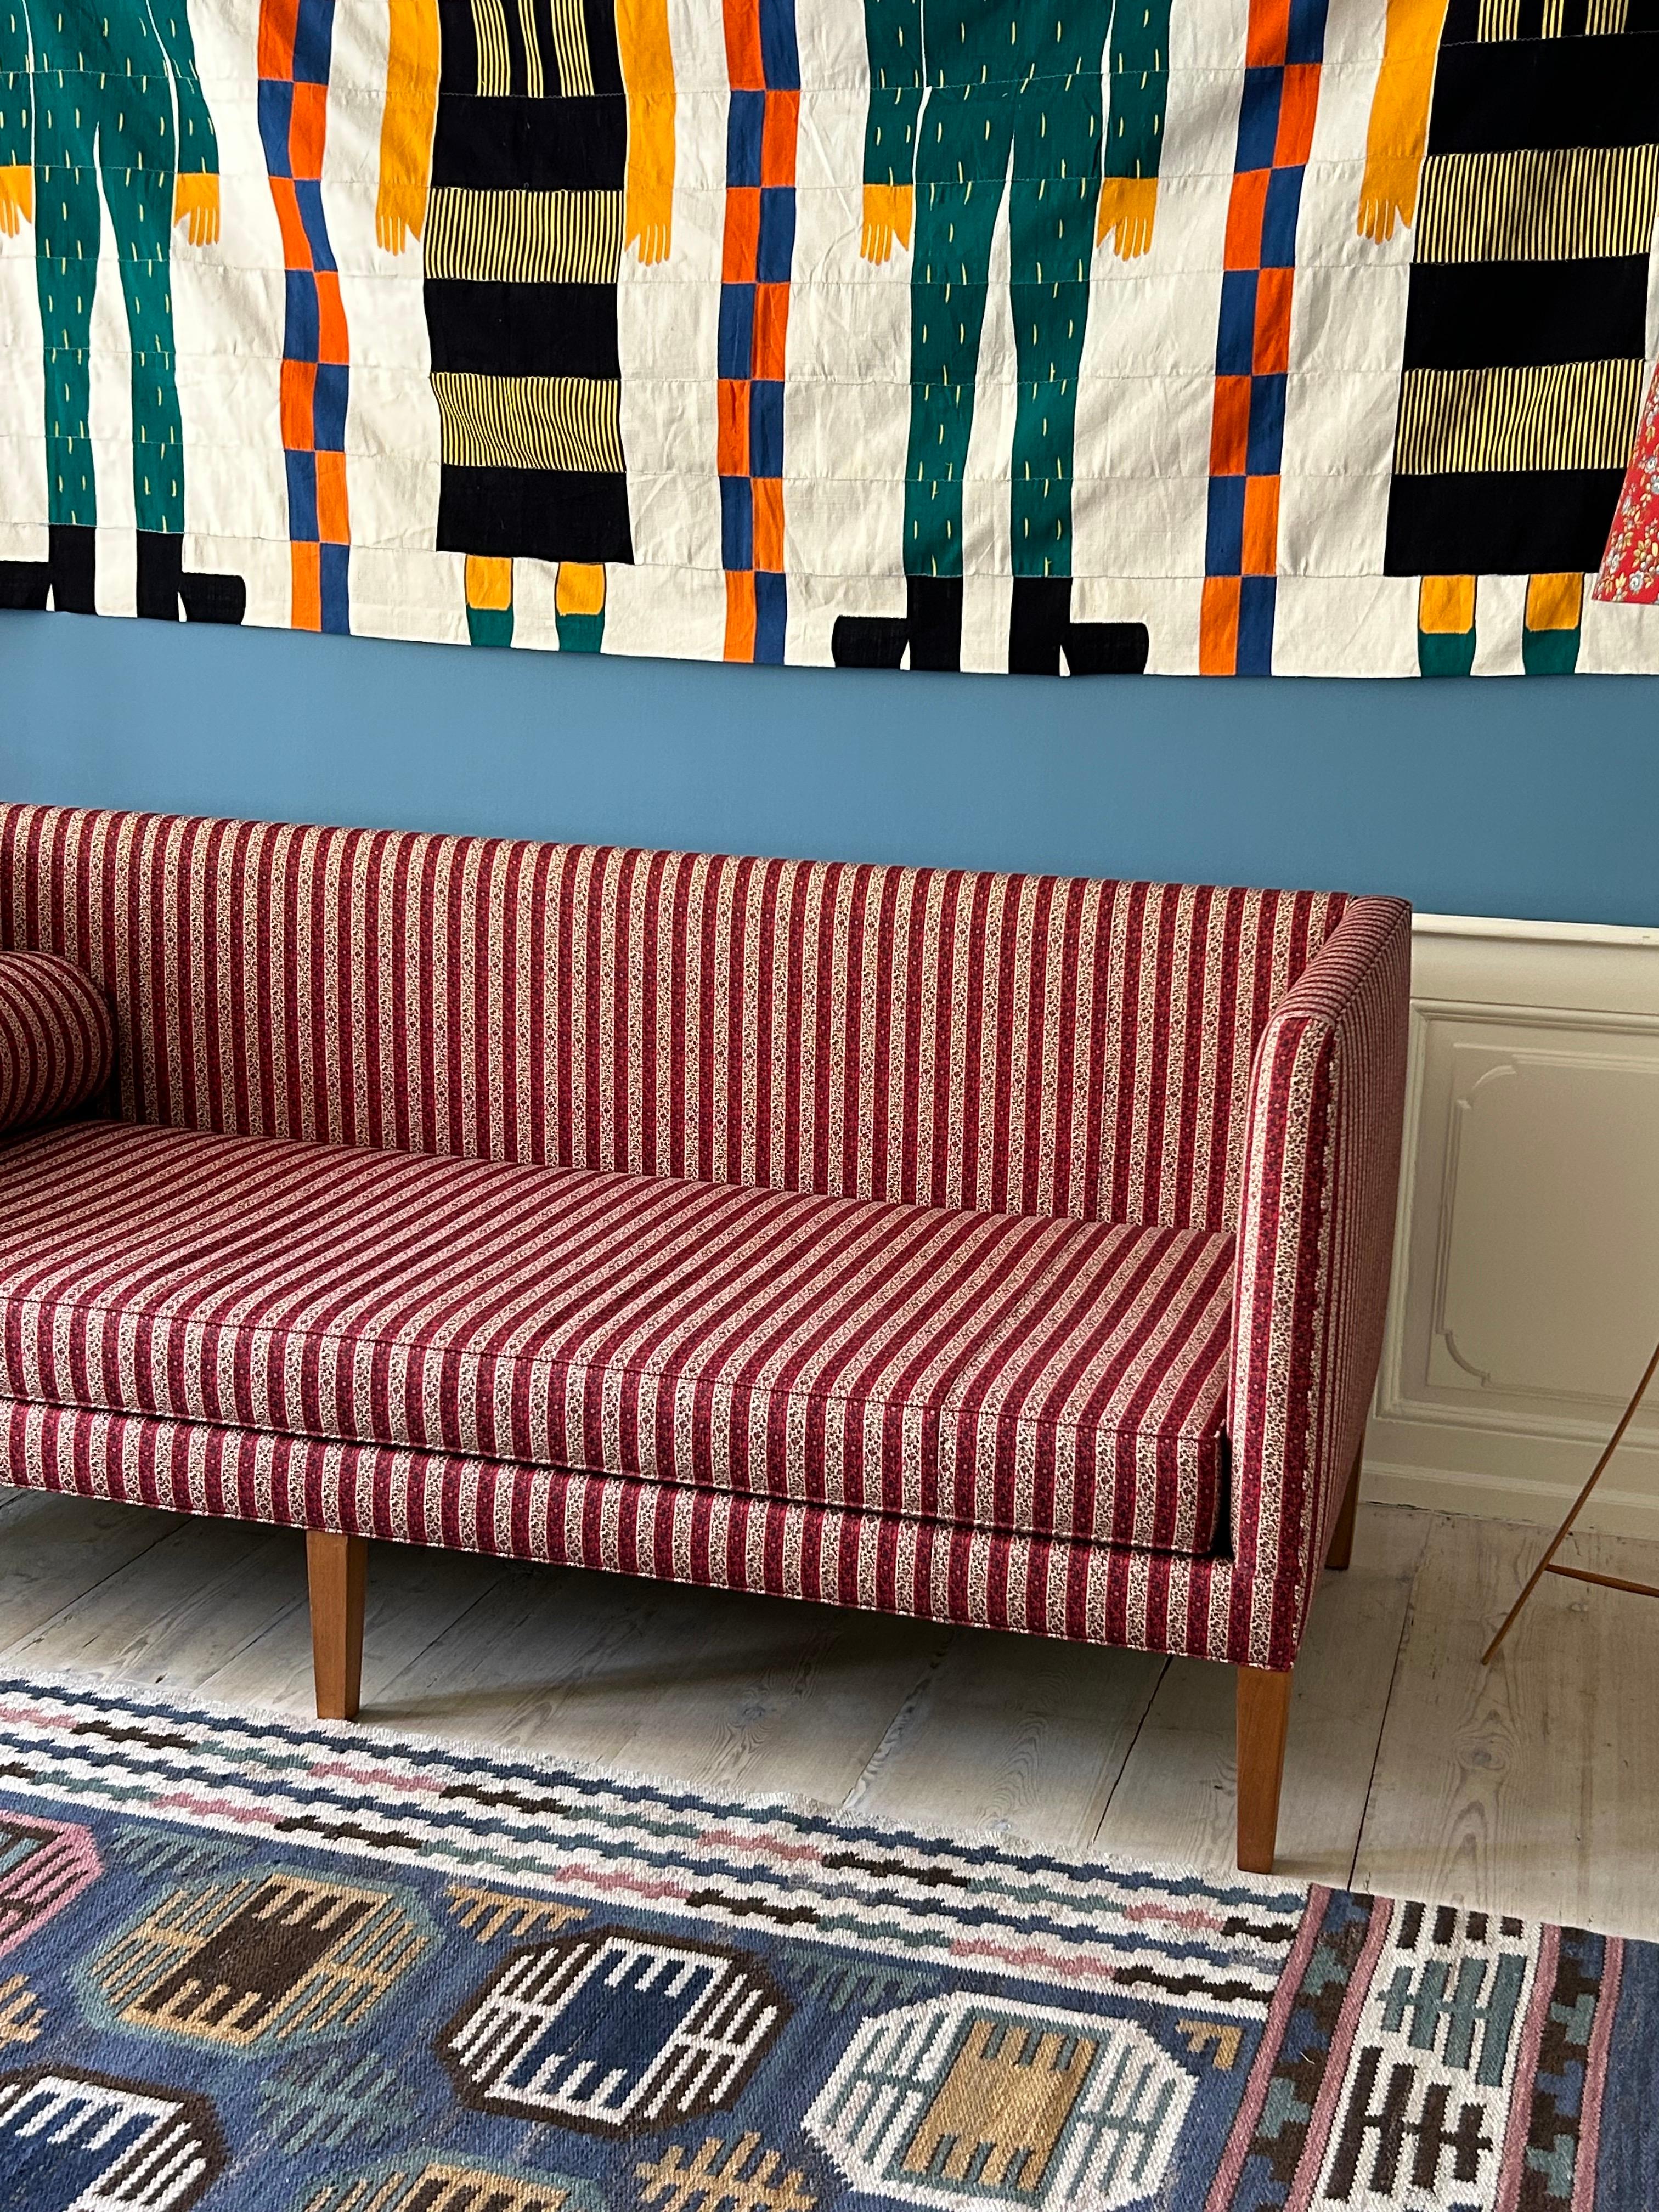 Textile Contemporary Sofa in Customized Striped Red Upholstery by the Apartment, Belgium For Sale